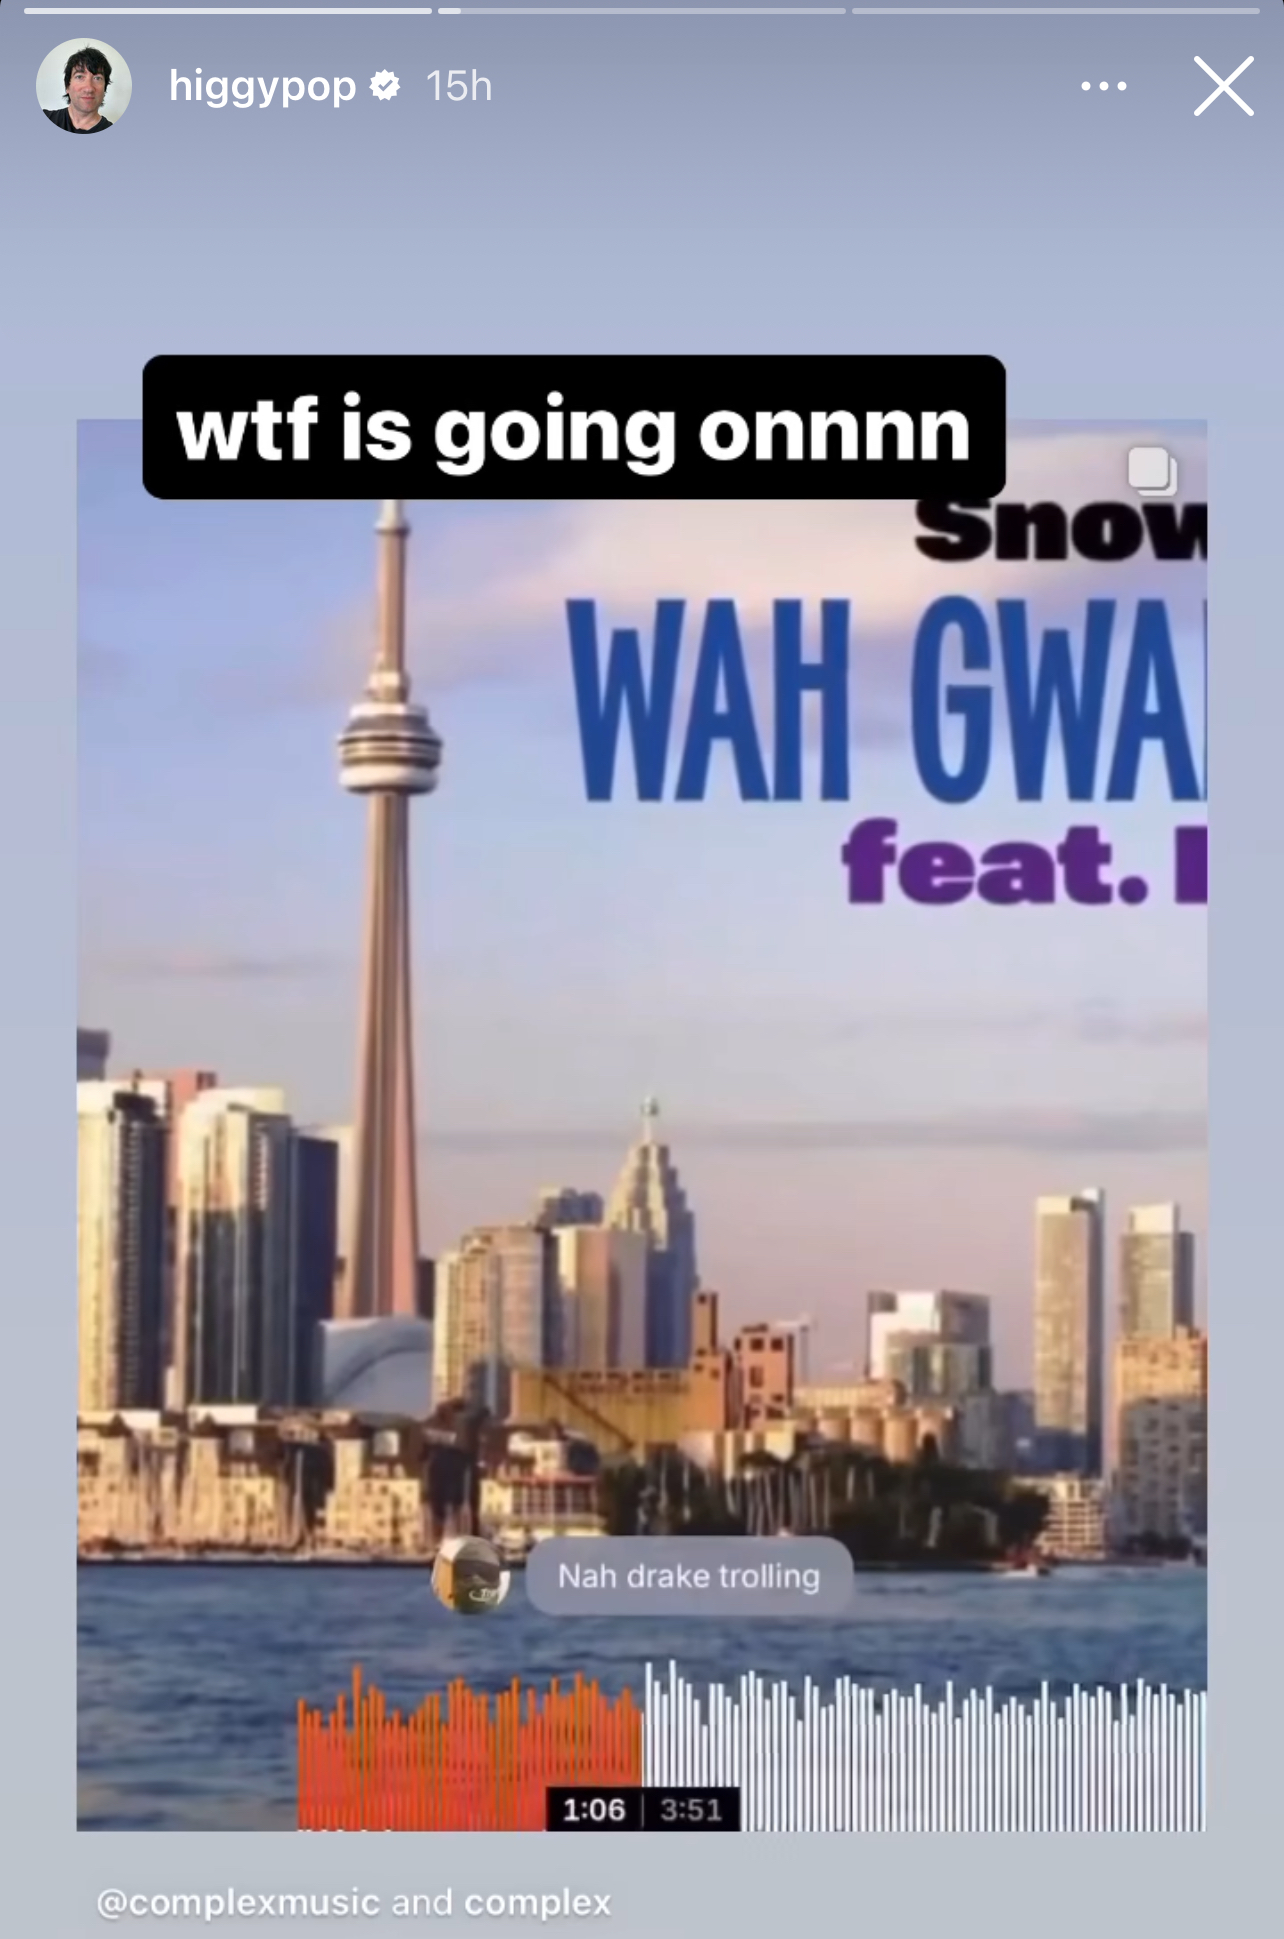 Screenshot of @higgypop&#x27;s Instagram story showing a music track named &quot;Wah Gwan&quot; by Snow featuring featured artist, with a comment &quot;Nah drake trolling&quot; and text &quot;wtf is going onnnn.&quot;